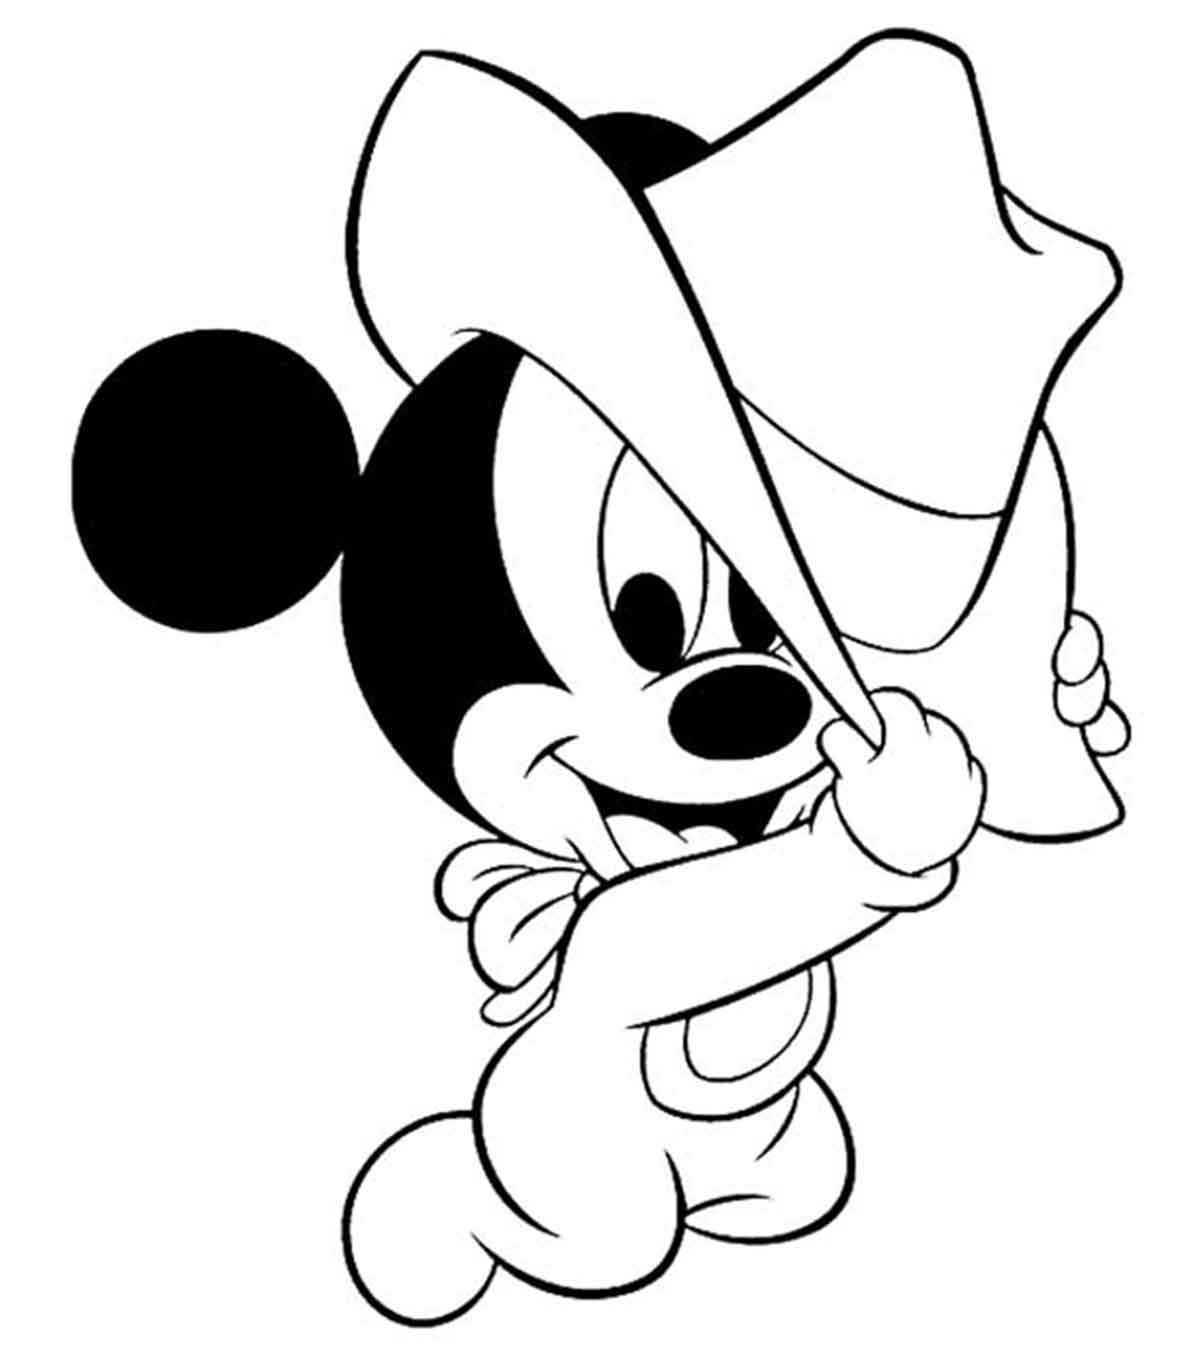 Free Baby Minnie Mouse Coloring Pages Top 75 Free Printable Mickey Mouse Coloring Pages Online